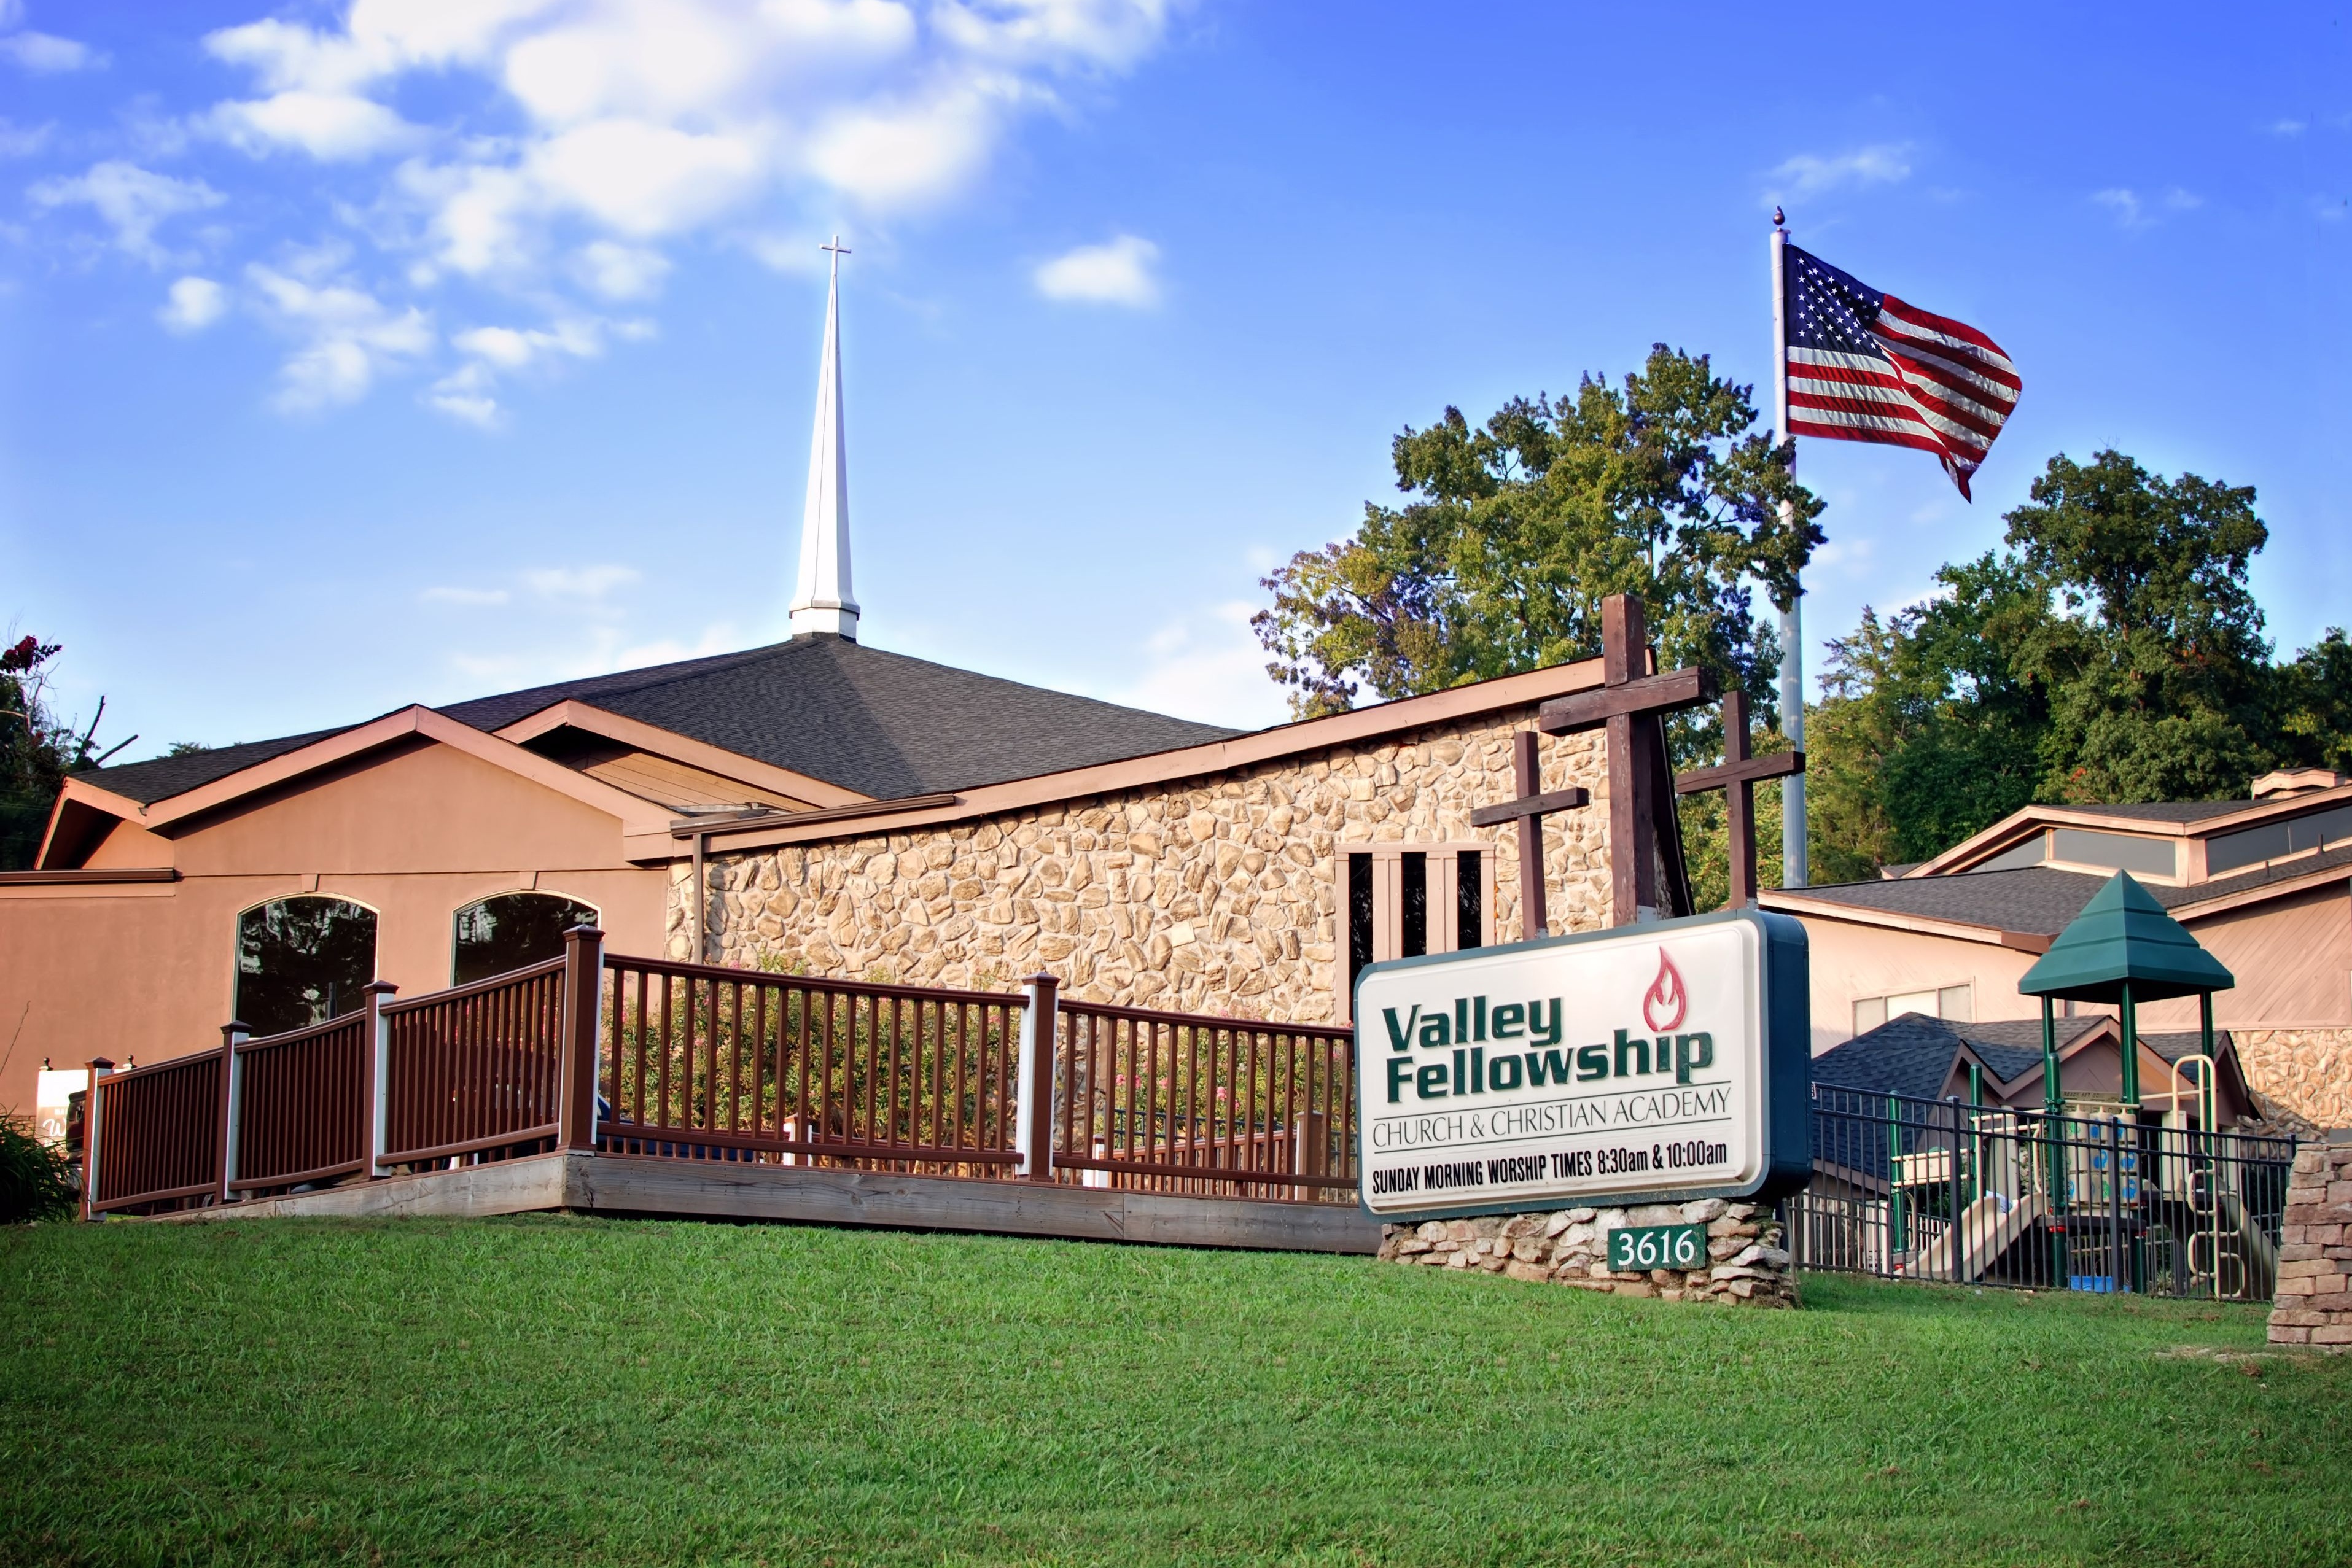 Valley Fellowship building with a sign and an American flag